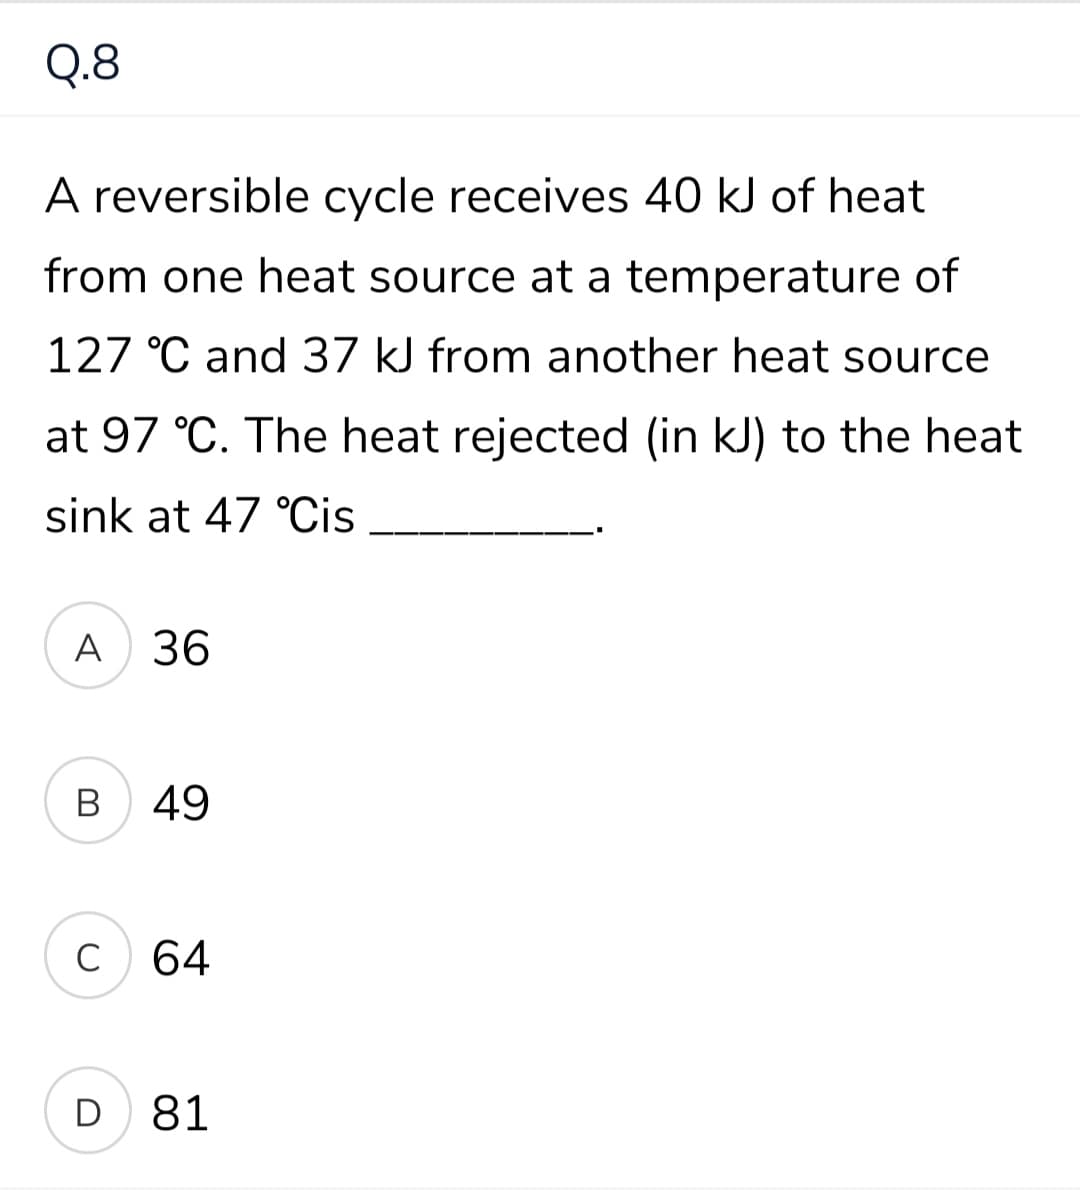 Q.8
A reversible cycle receives 40 kJ of heat
from one heat source at a temperature of
127 °C and 37 kJ from another heat source
at 97 °C. The heat rejected (in kJ) to the heat
sink at 47 °Cis
A
36
В
49
C
64
D 81
